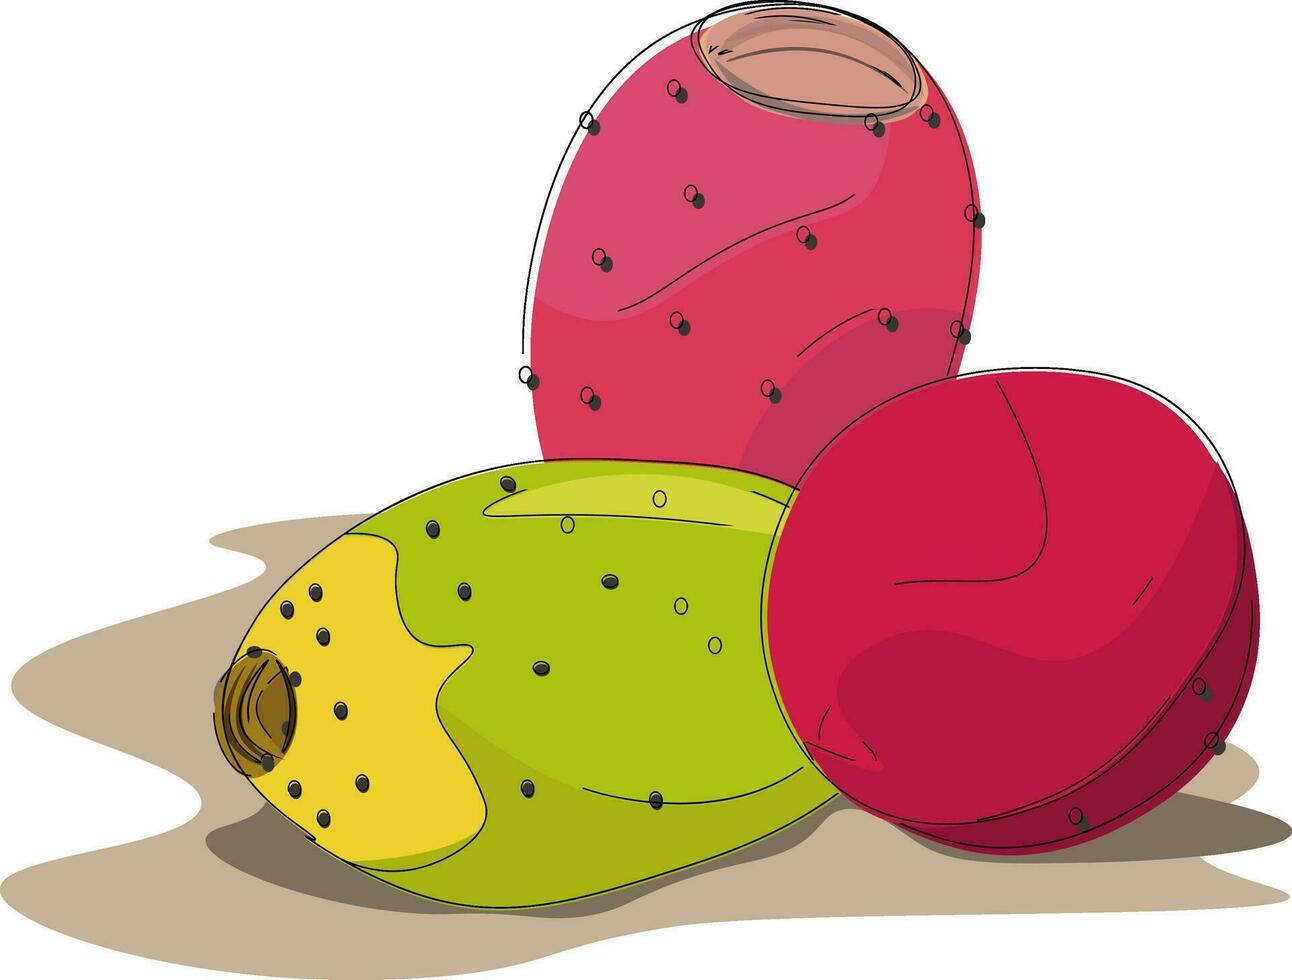 Clipart of the prickly pear fruits in red and green colors, vector or color illustration